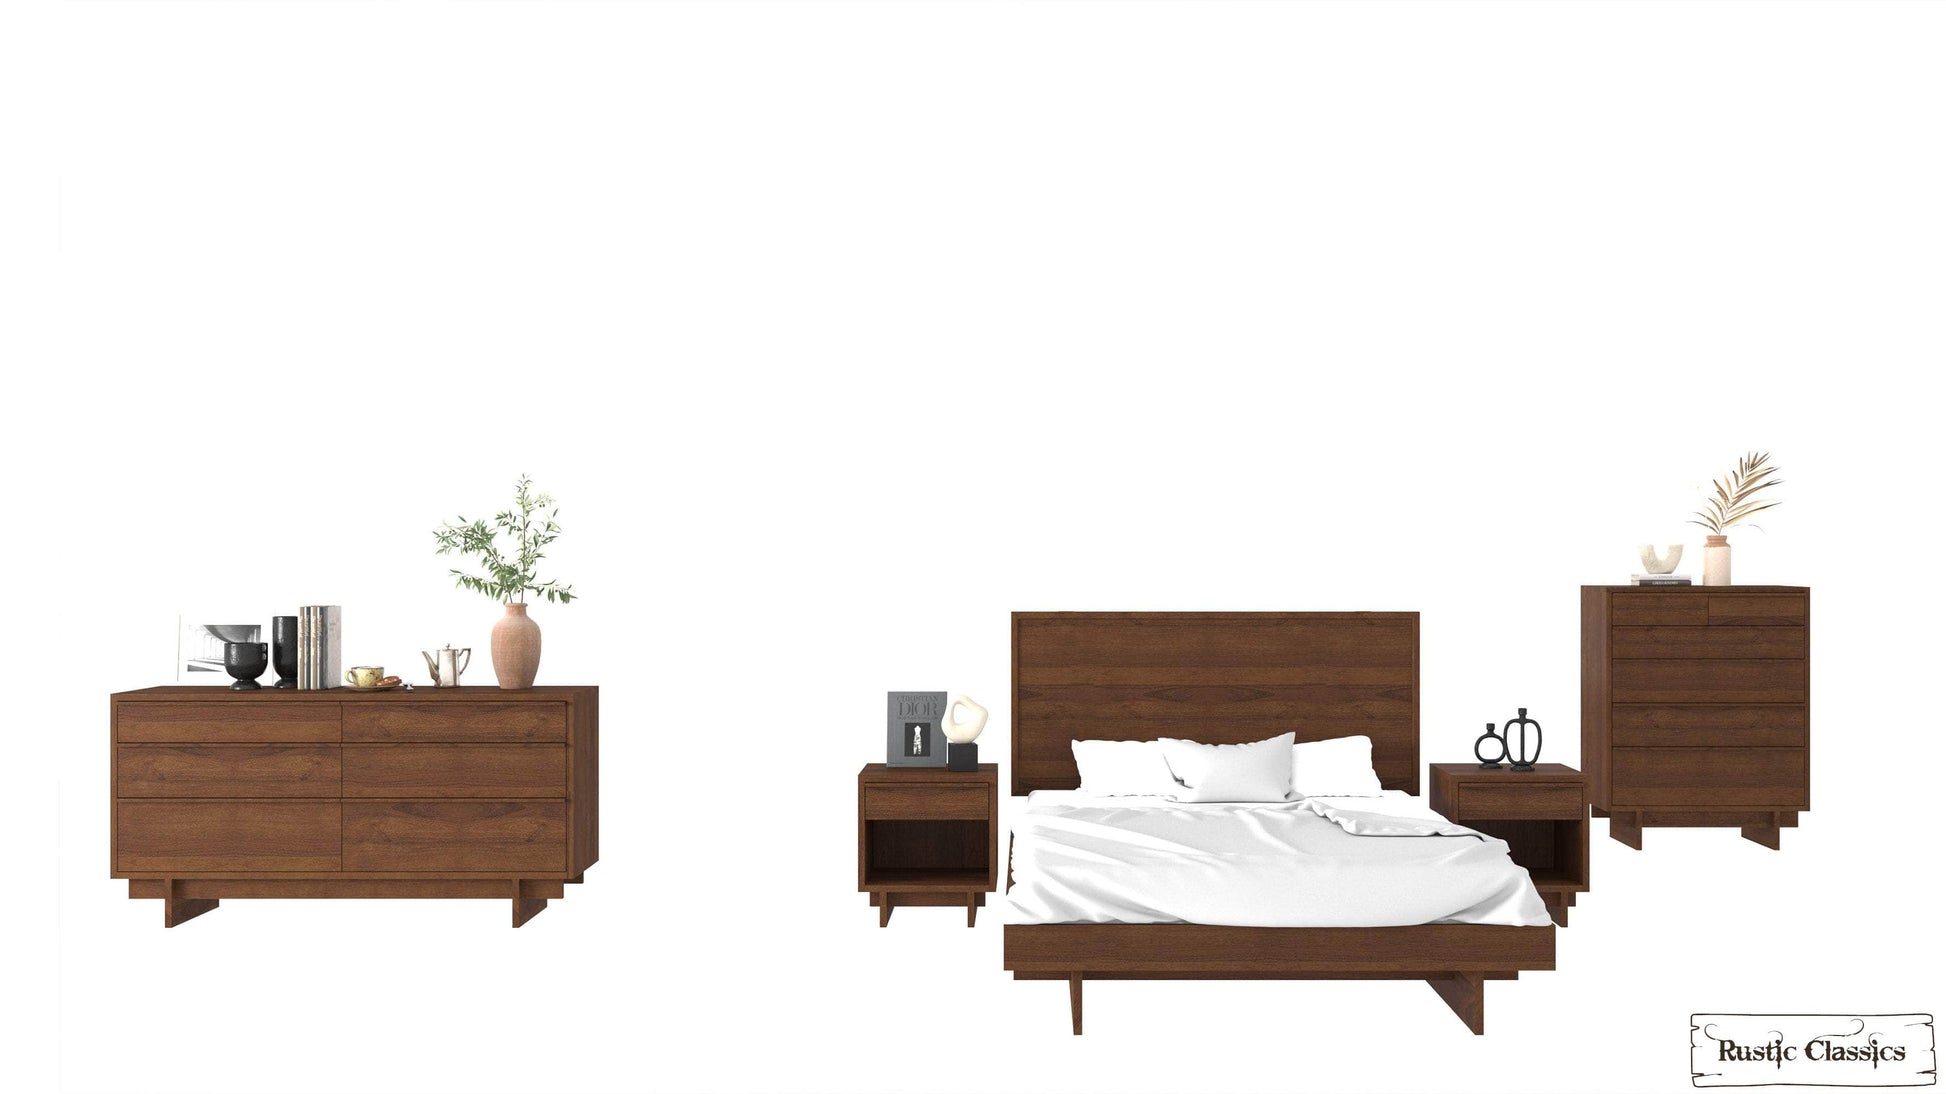 Pending - Rustic Classics Jasper 5 Piece Reclaimed Wood Platform Bedroom Furniture Set in Brown - Available in 2 Sizes